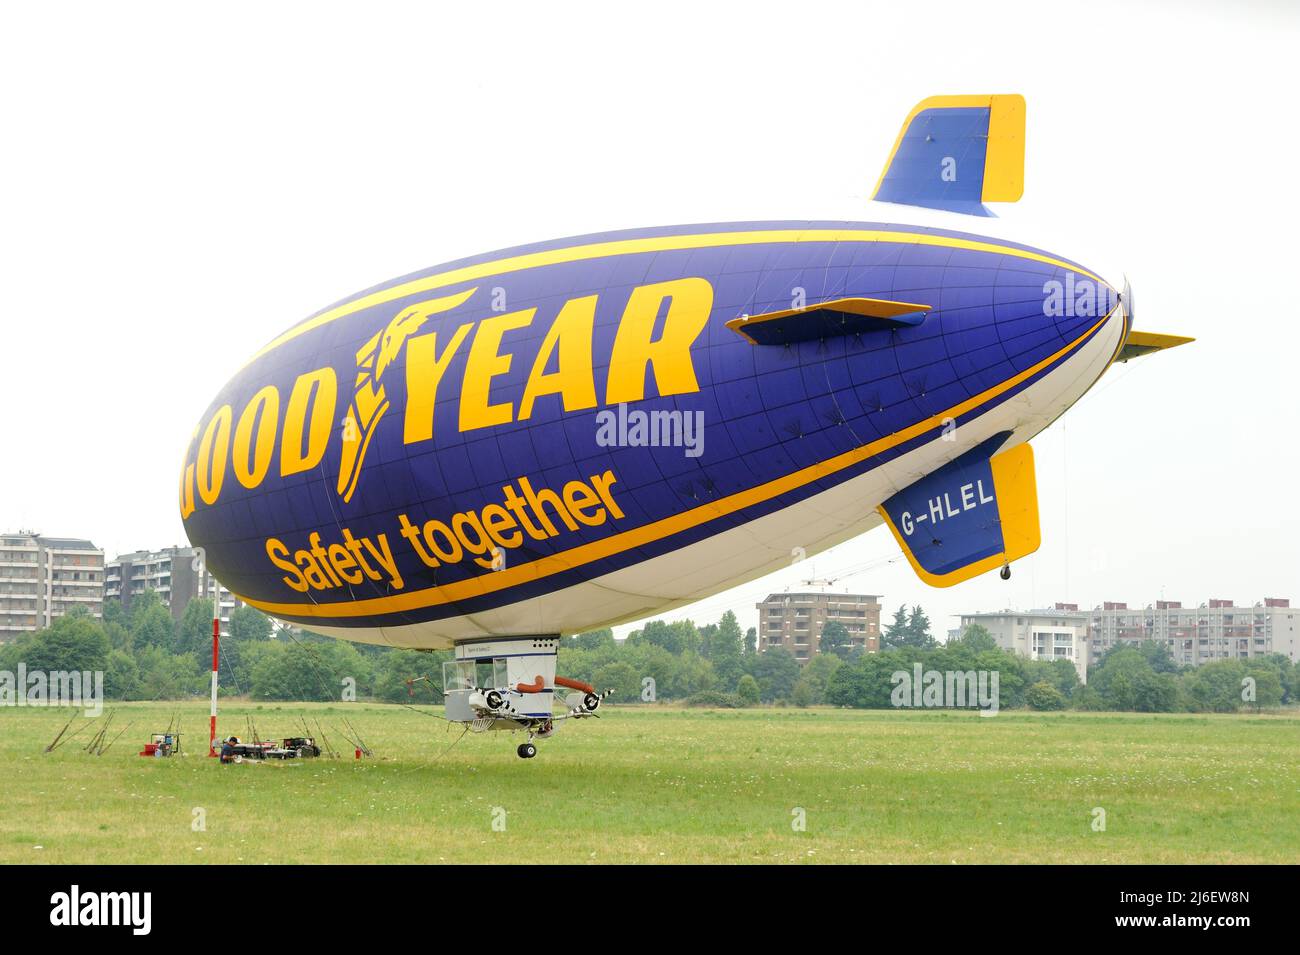 Good Year Blimp Safety Togeter - Bresso, Milano Italien 2011 Stockfoto